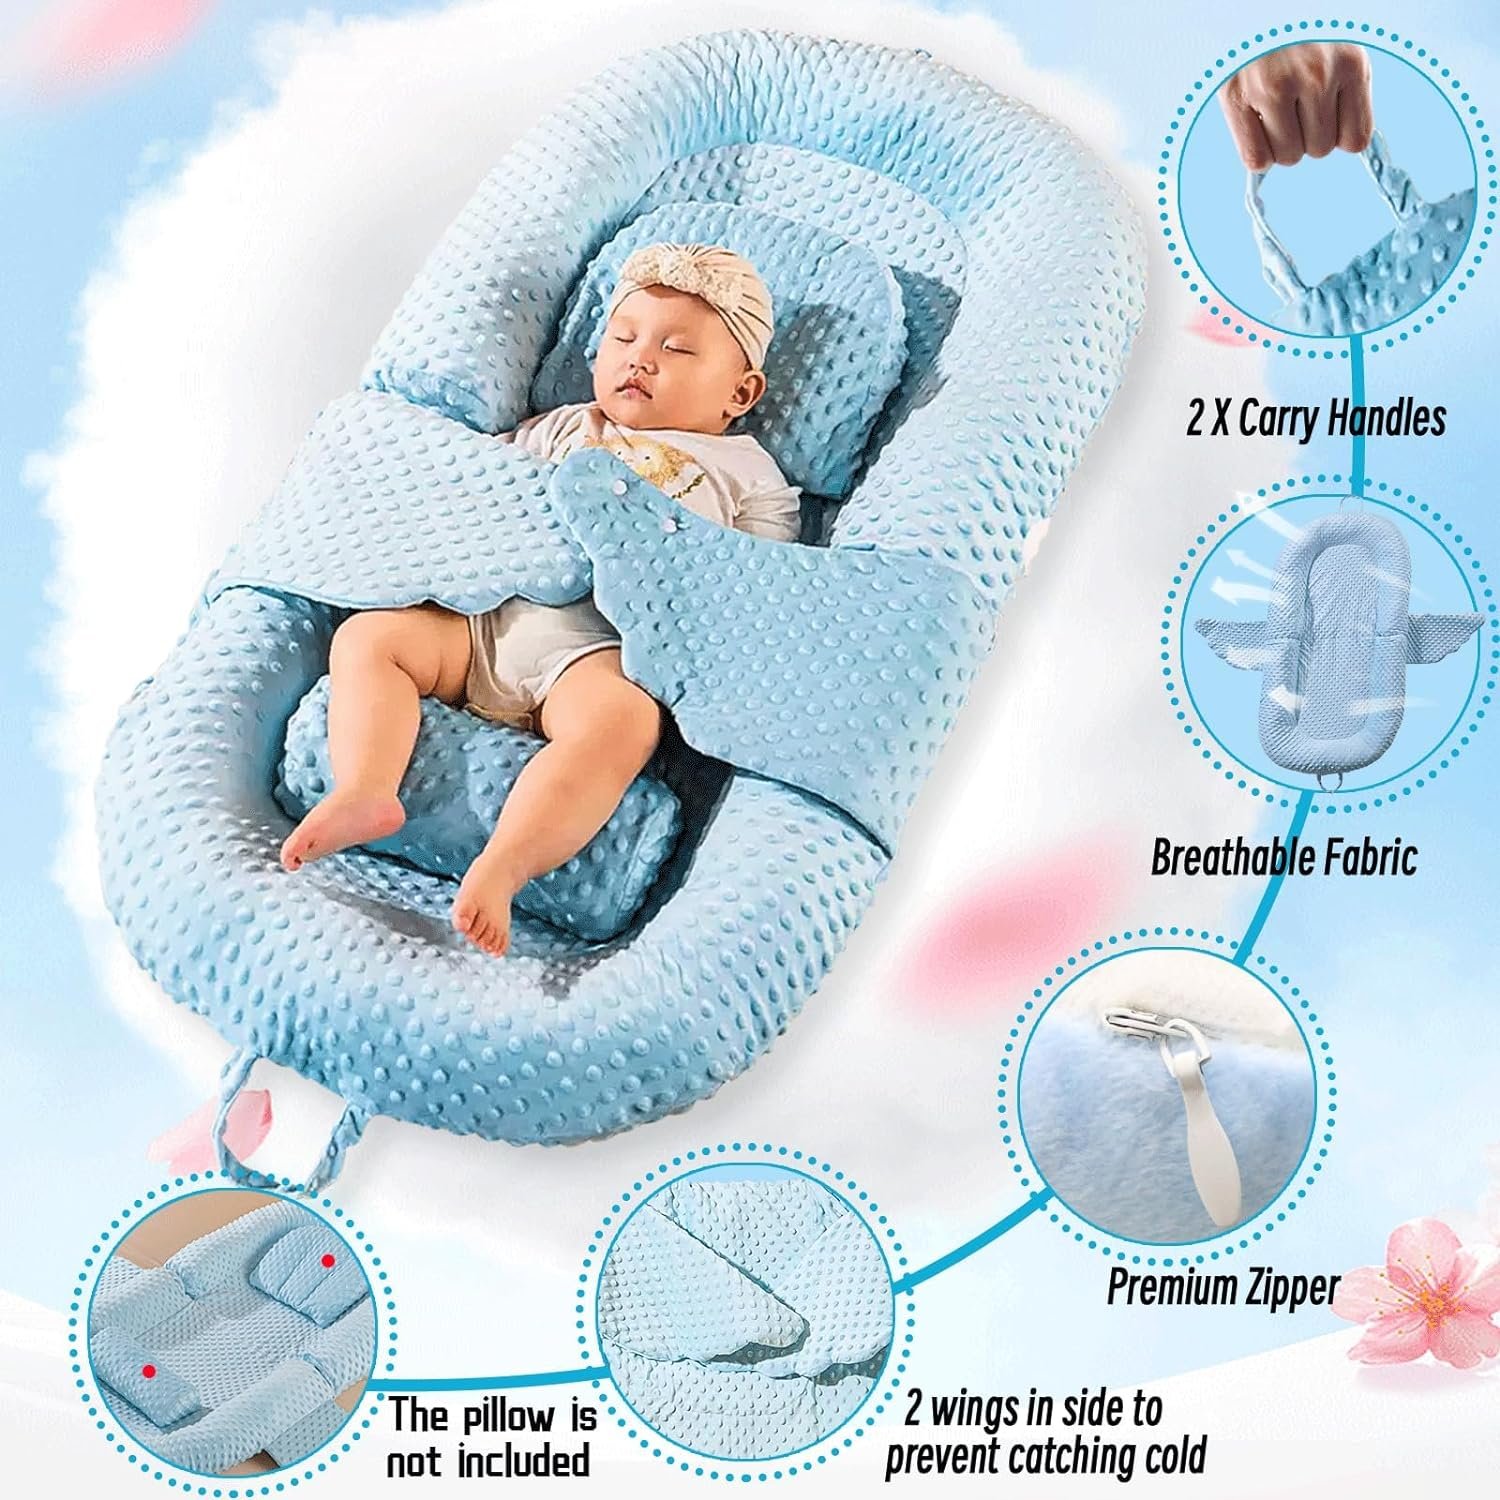 Baby Lounger for Newborn review